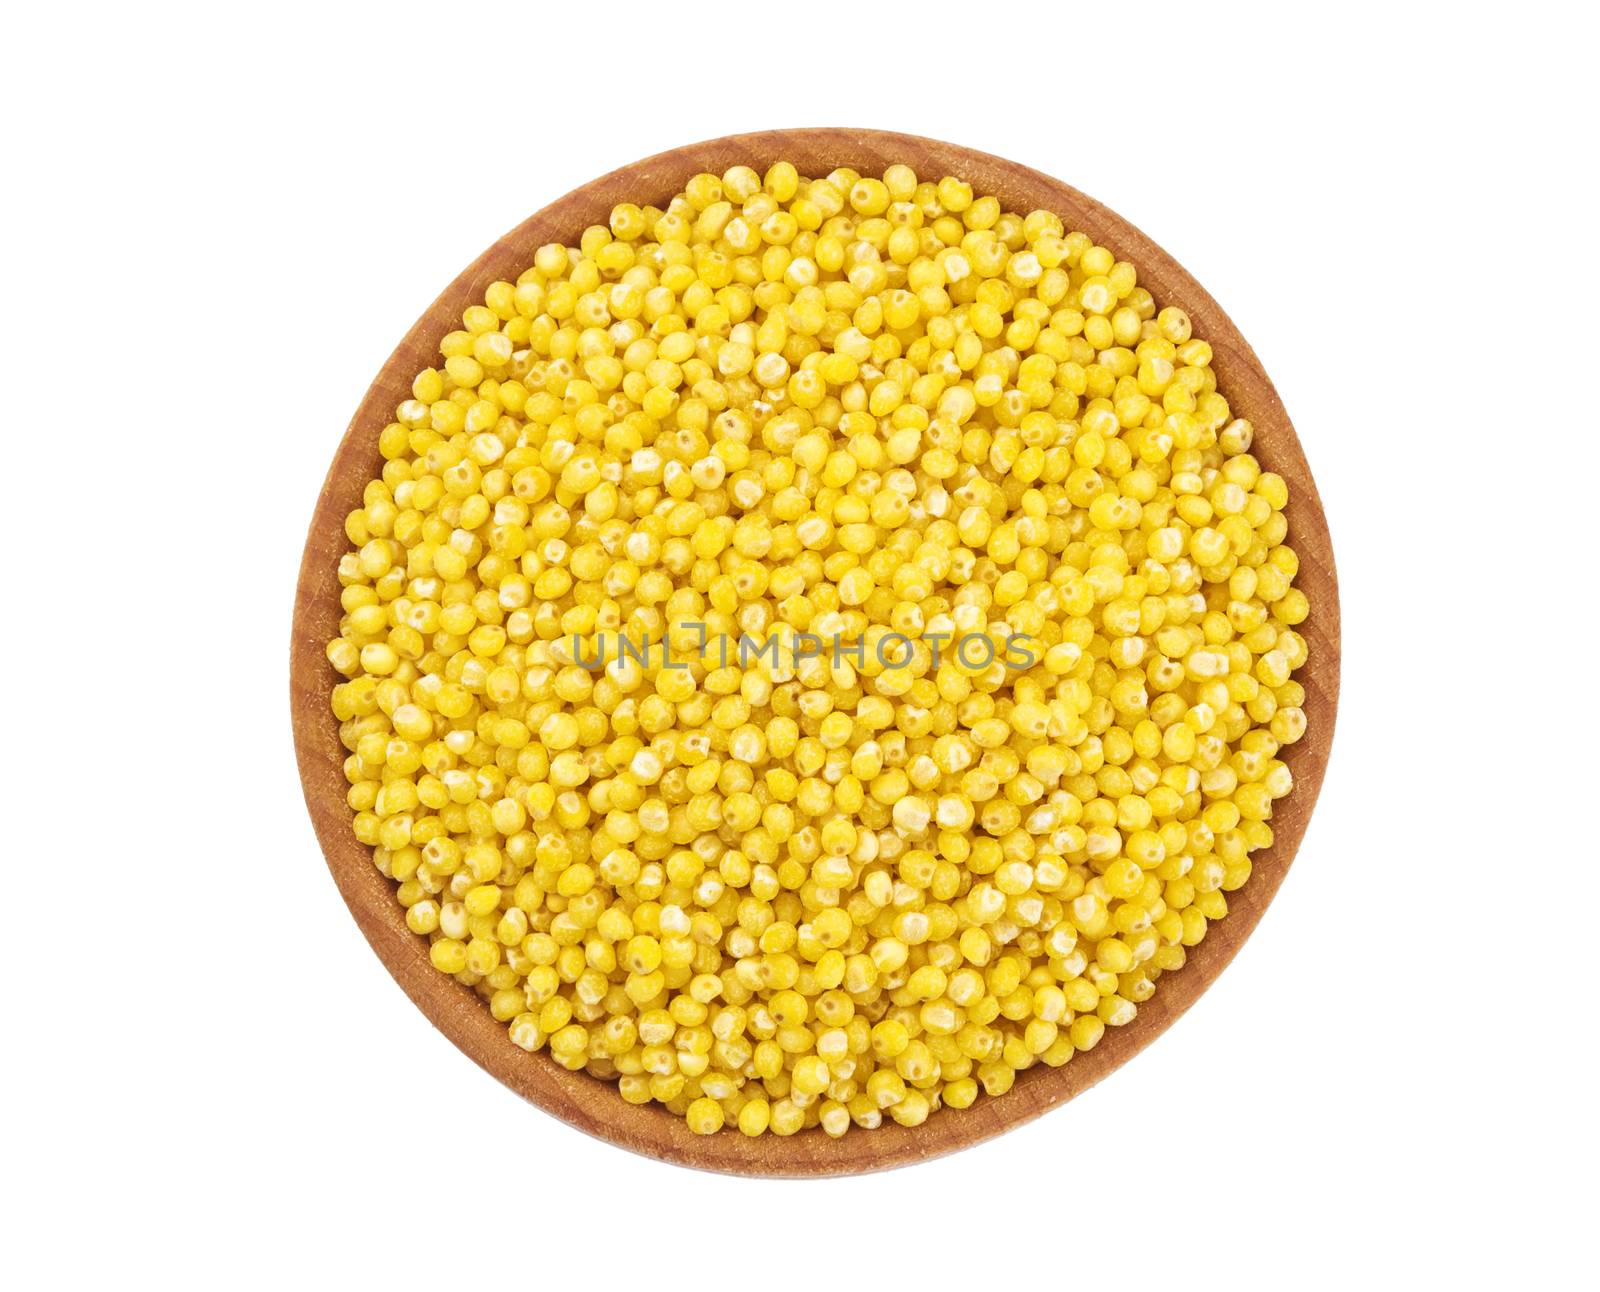 Millet in wooden bowl isolated on white background. Top view by xamtiw